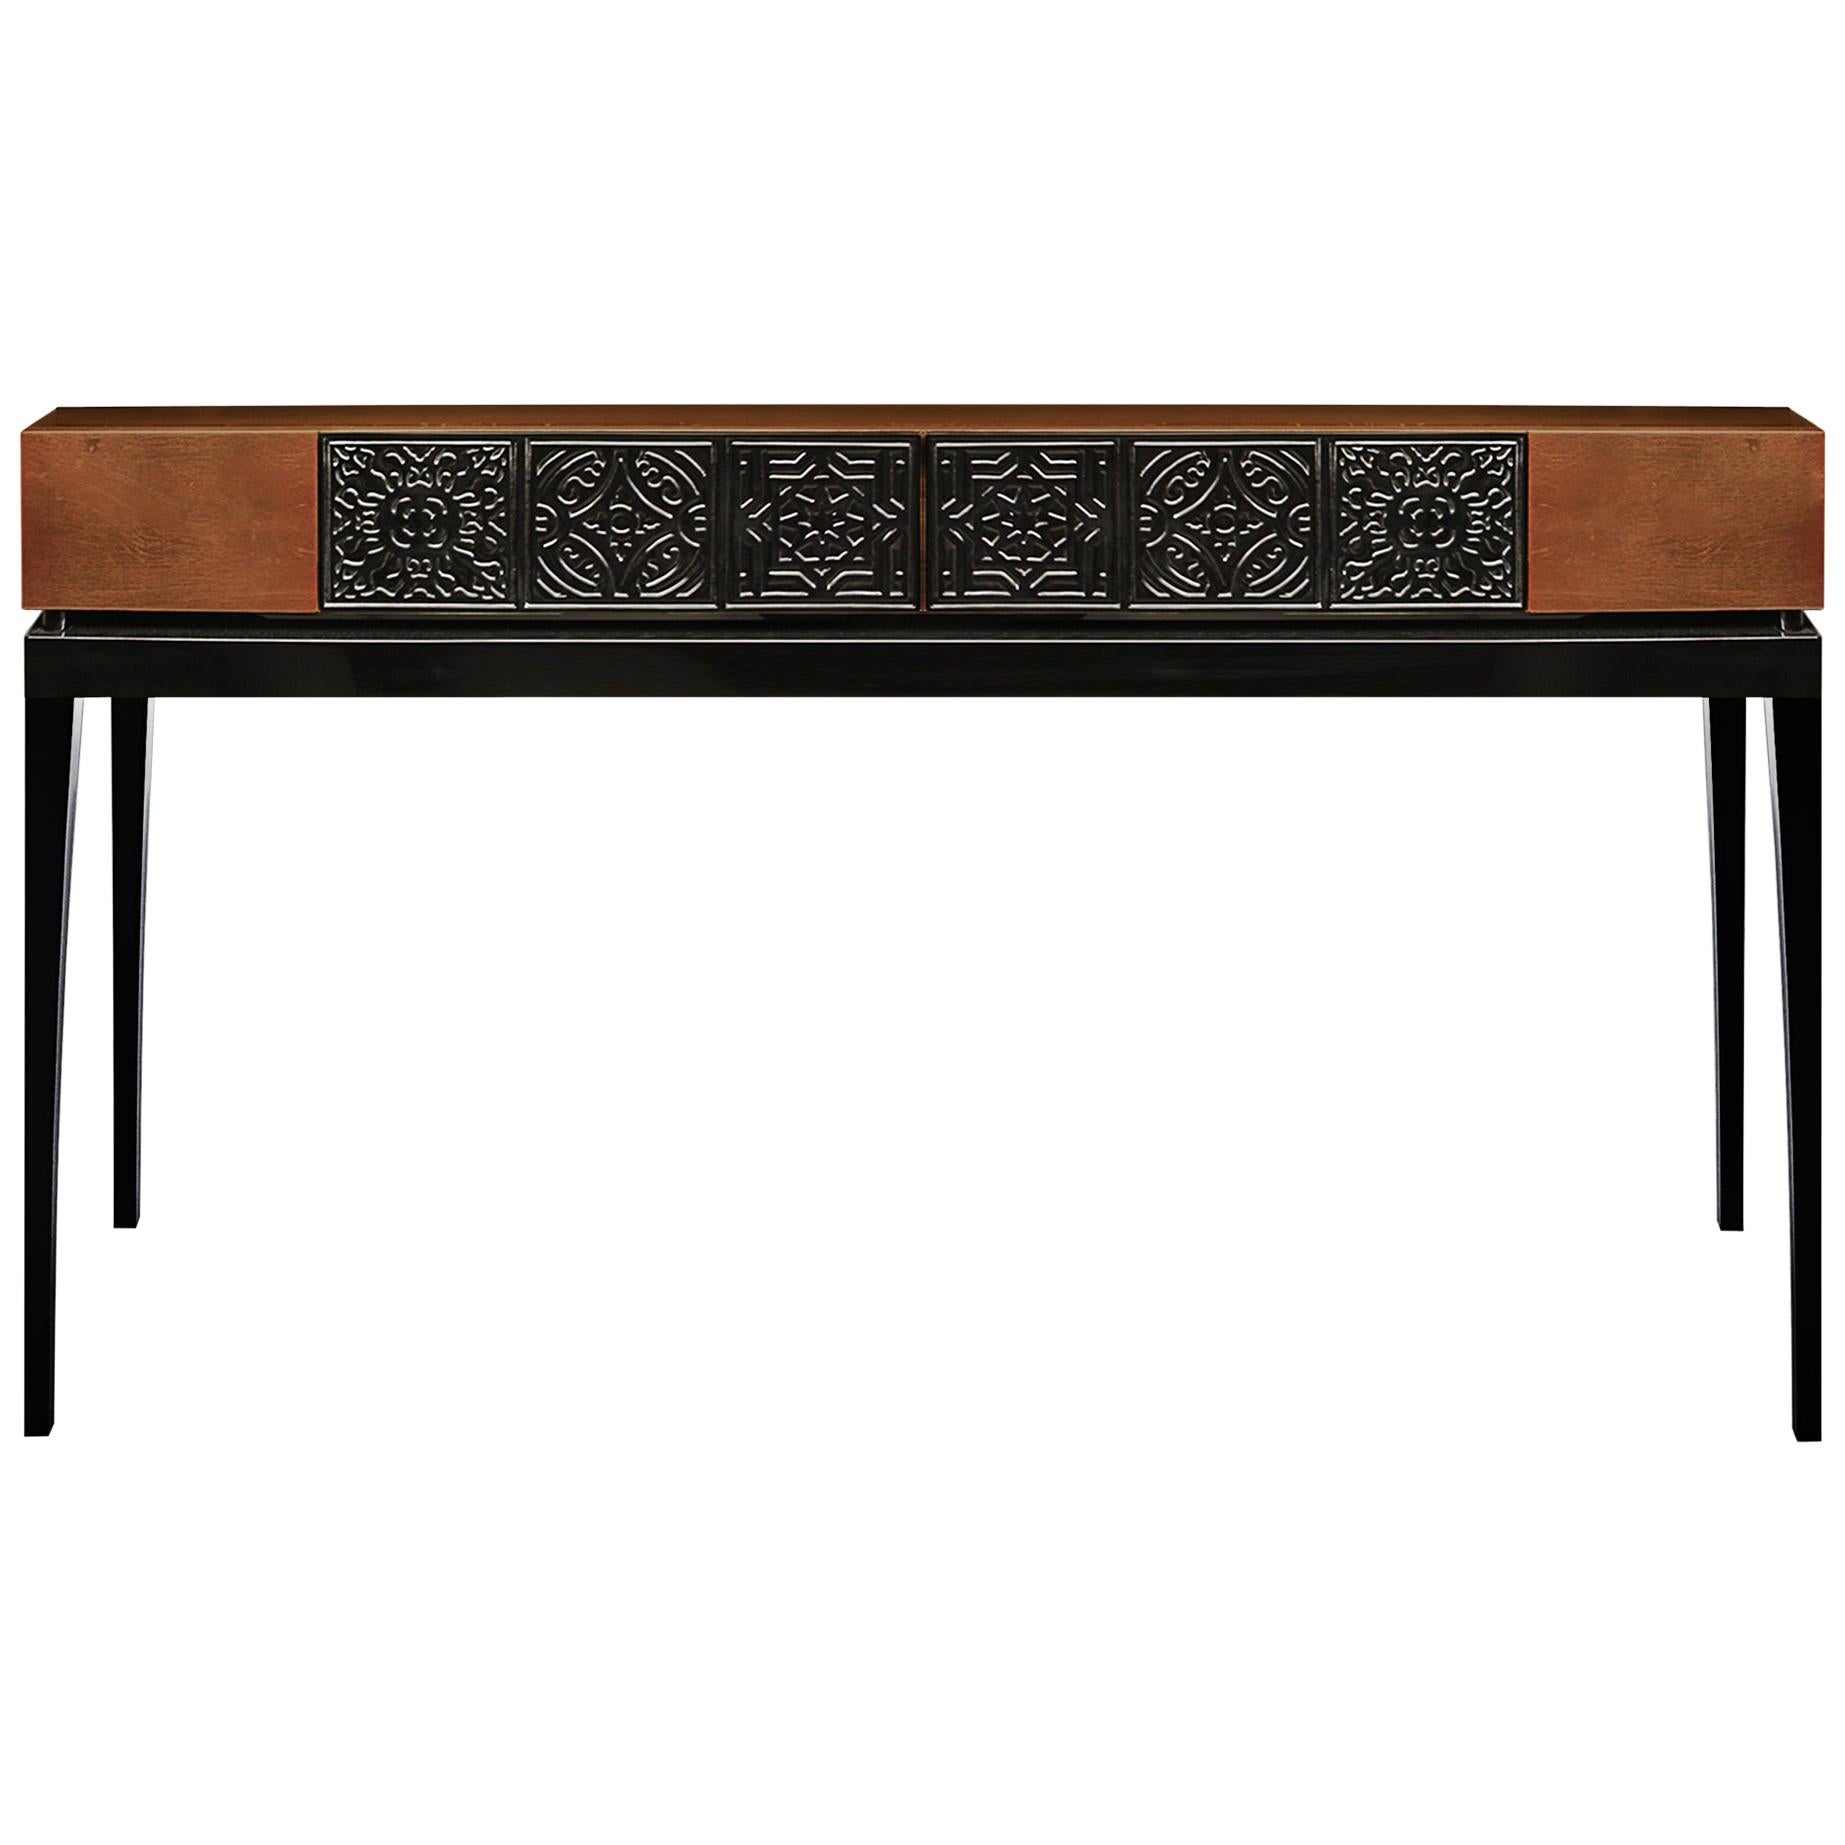 21st Century Virtuoso II Console Wooden Carved Tiles